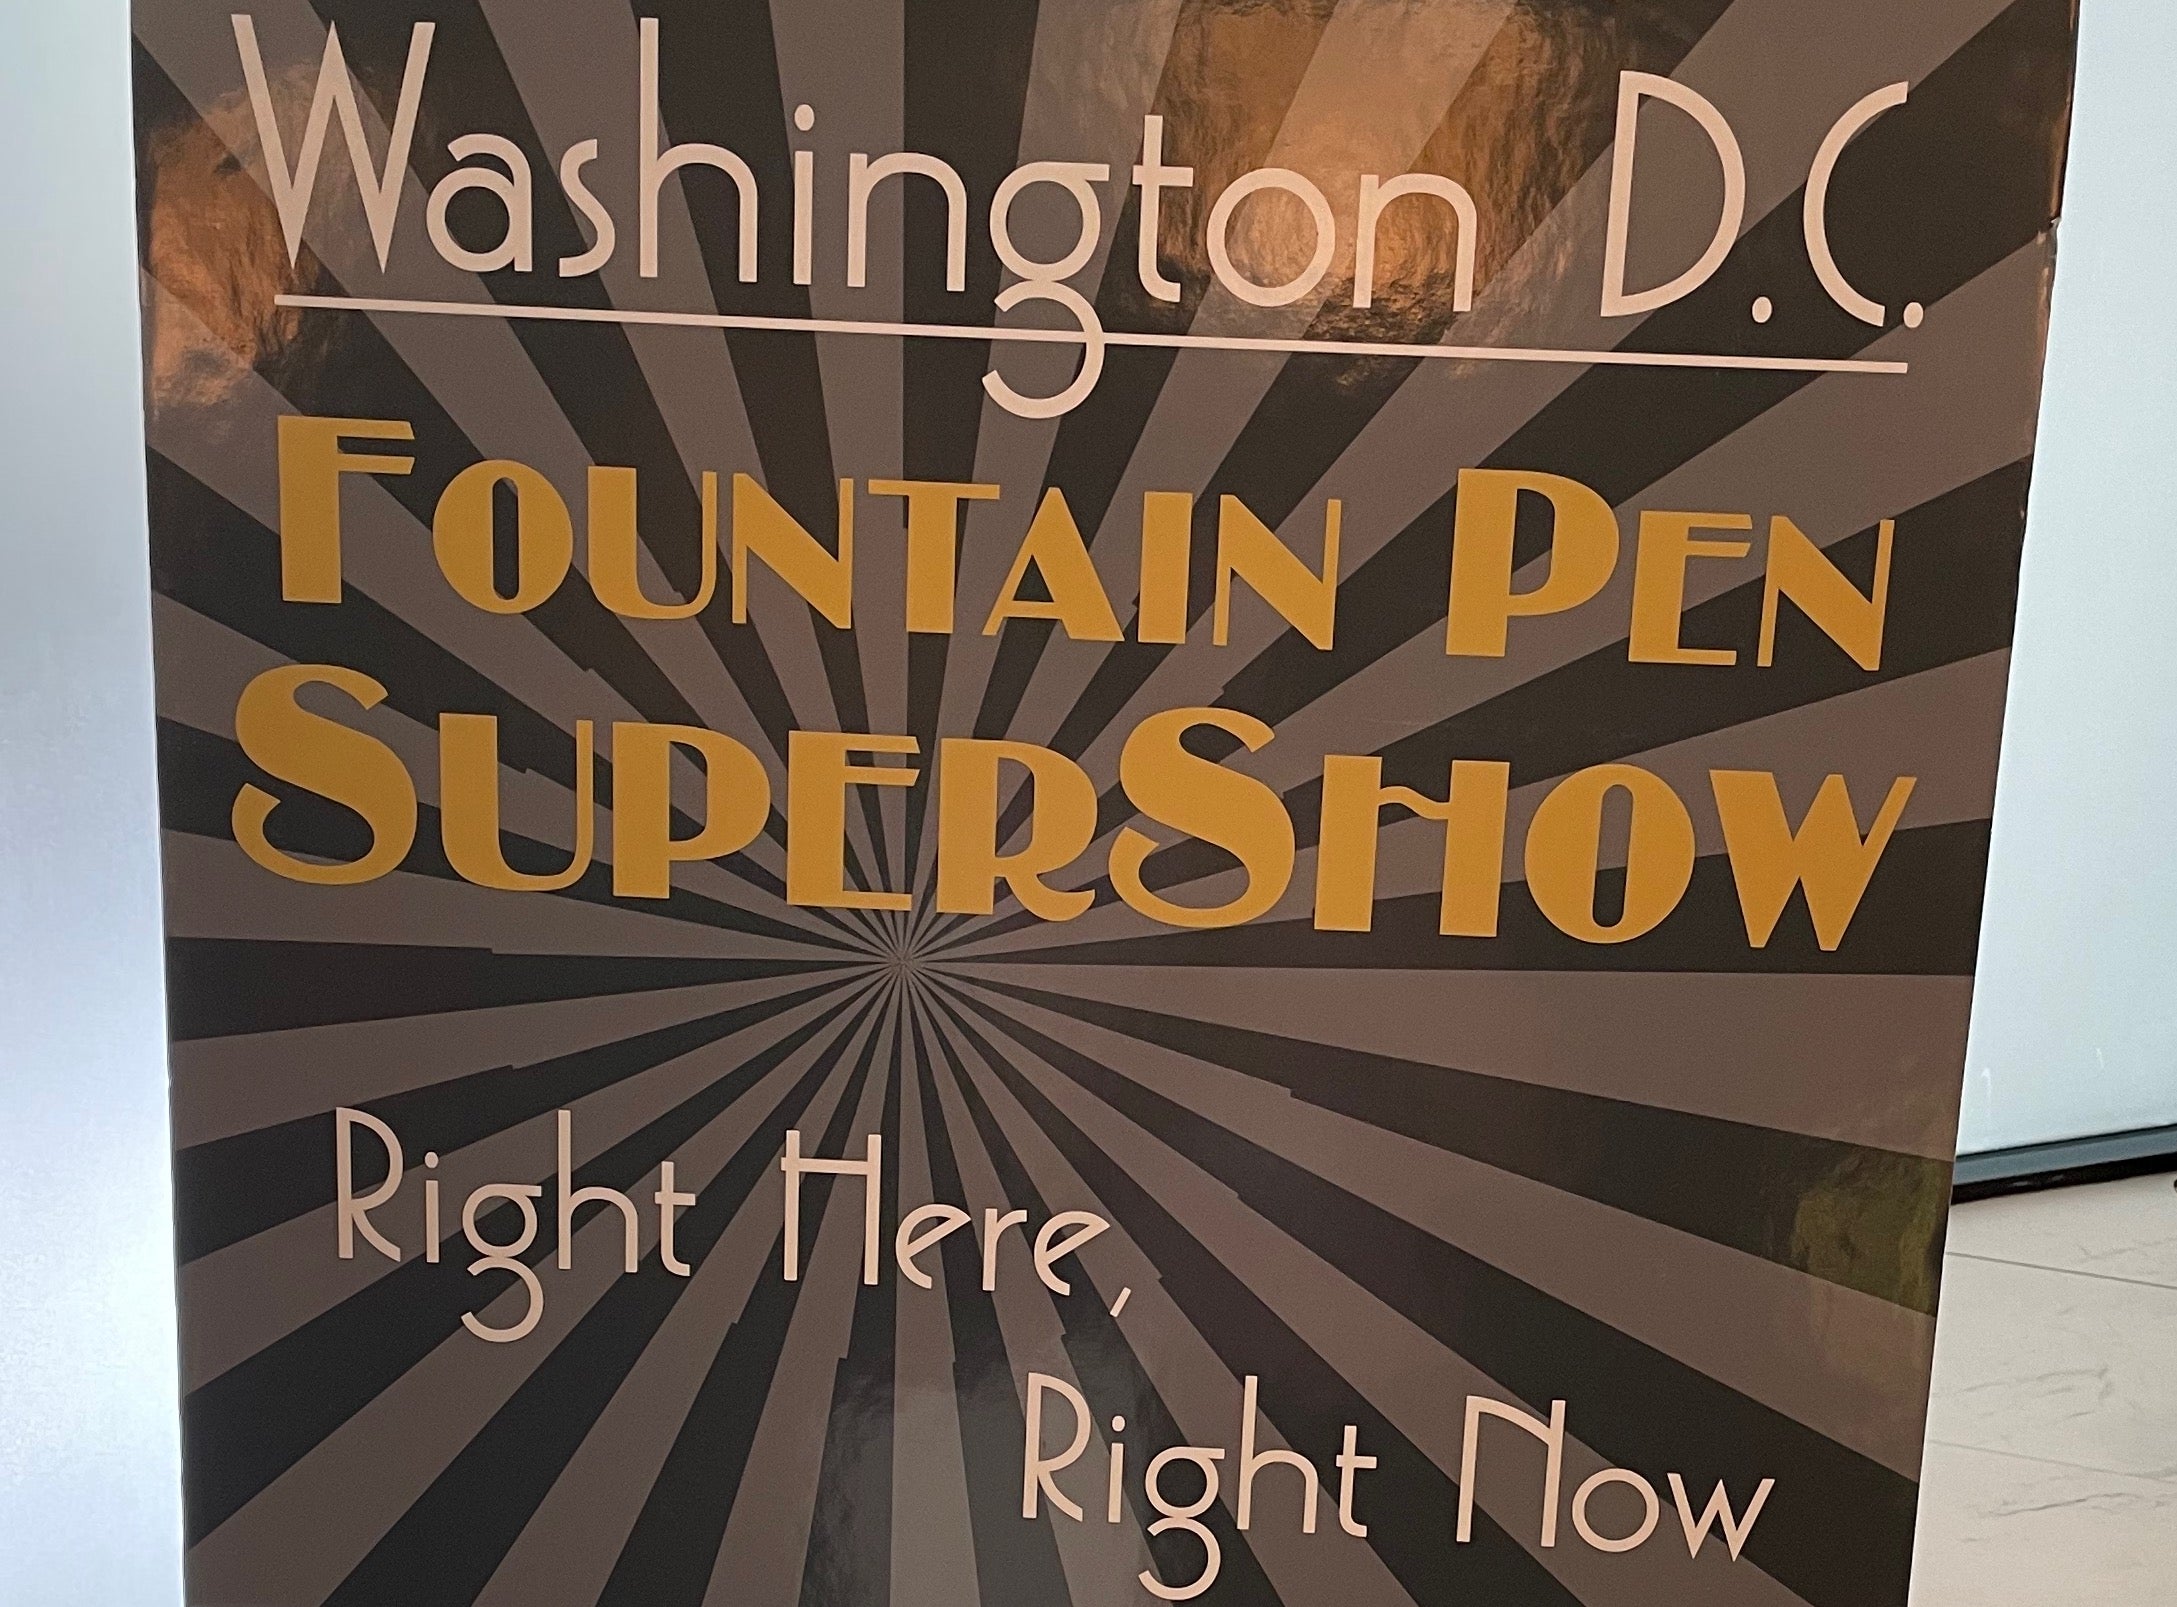 DC Pen Show, Part Two - It's All About the People